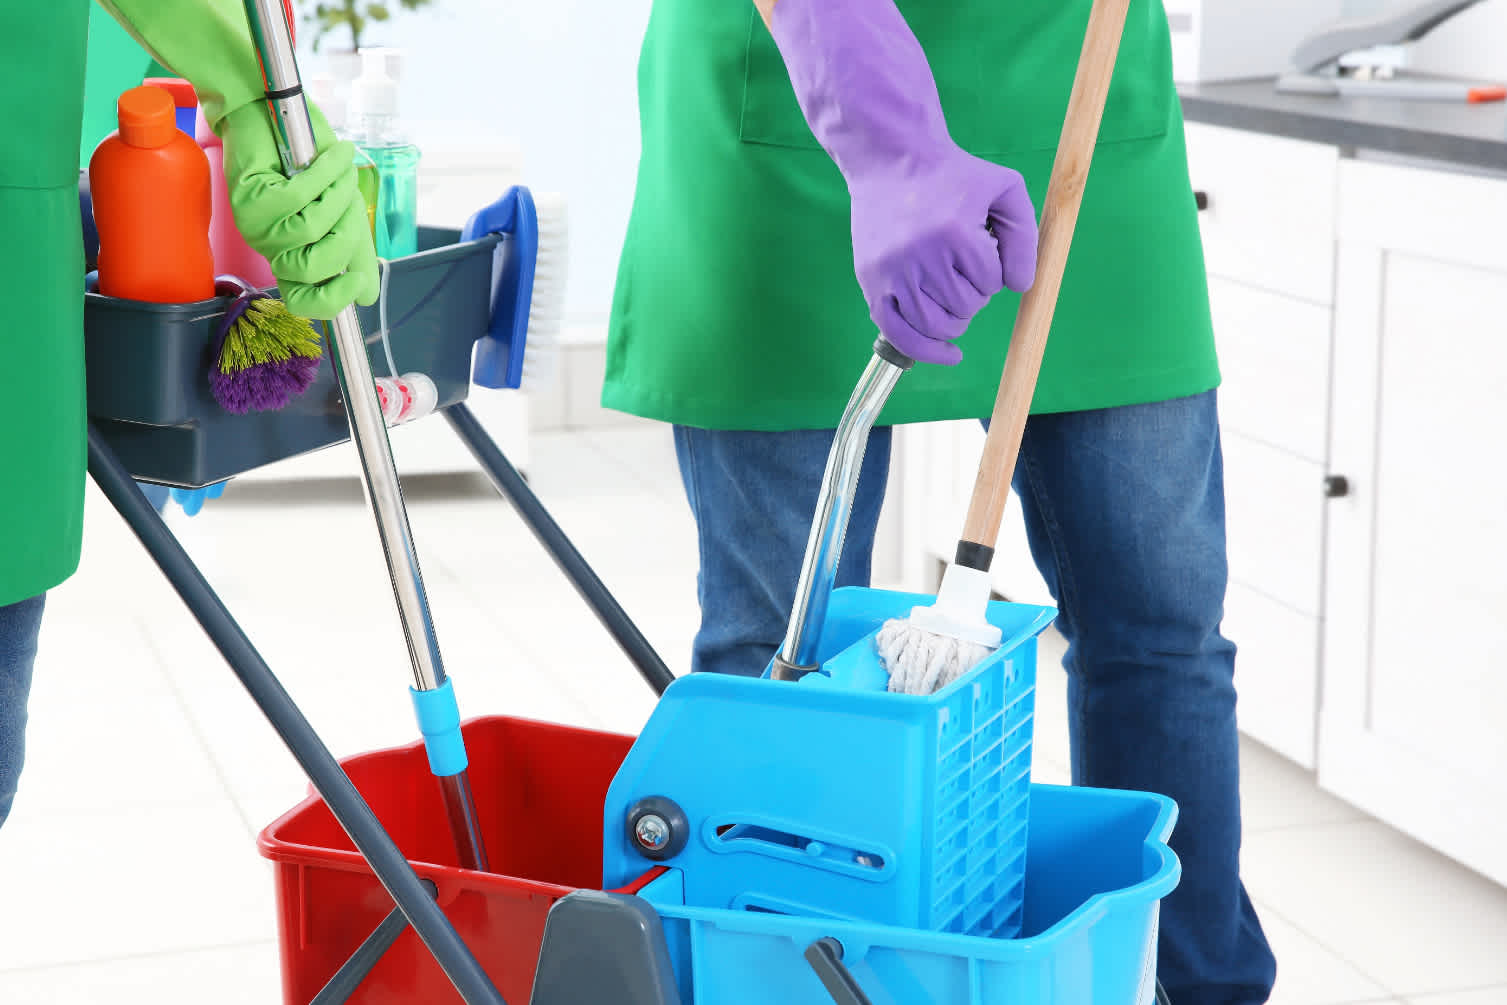 House Cleaning Service: How To Run Your Business Effectively